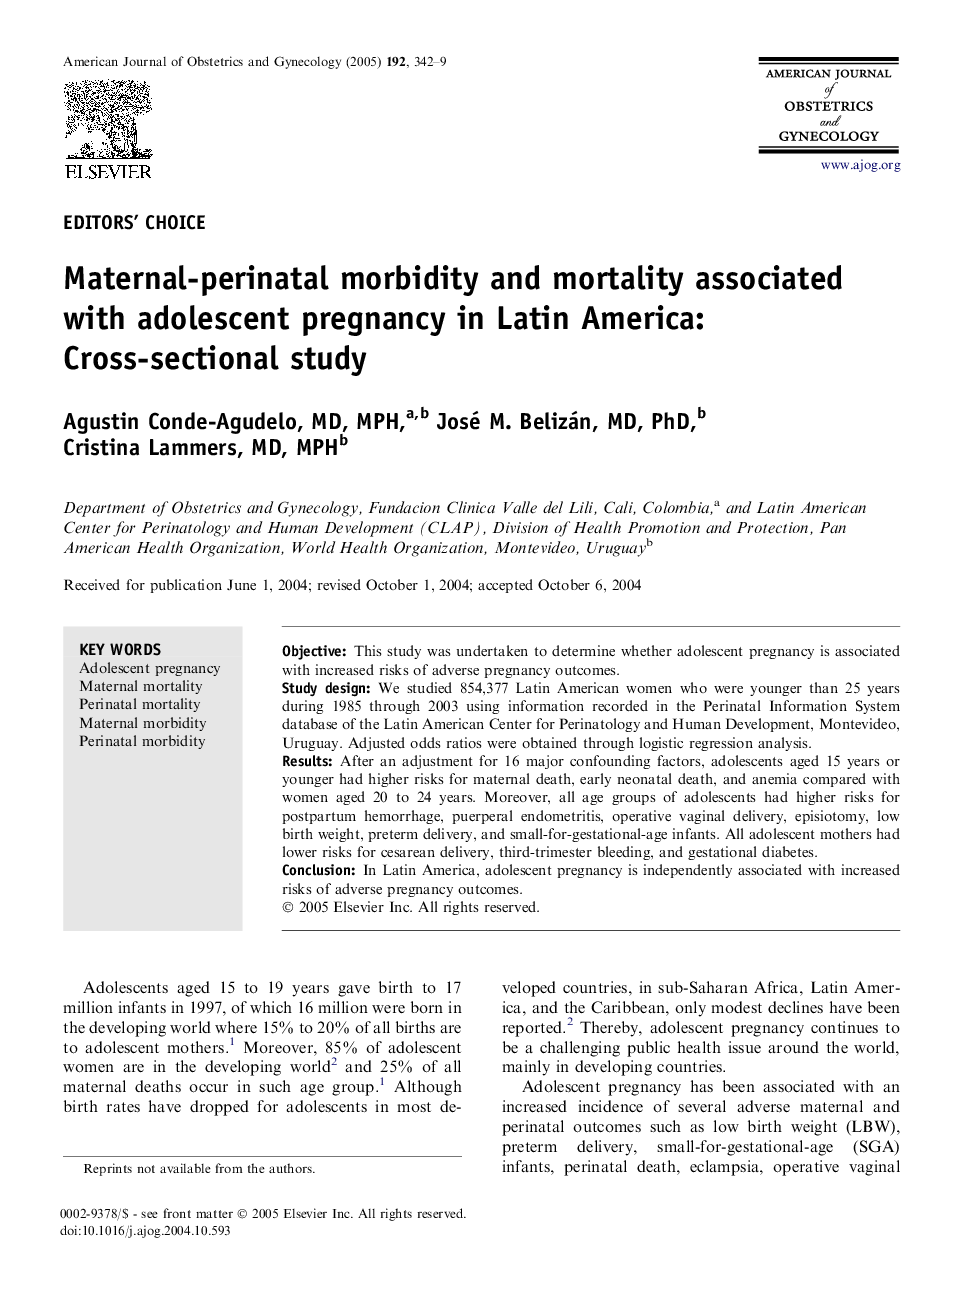 Maternal-perinatal morbidity and mortality associated with adolescent pregnancy in Latin America: Cross-sectional study